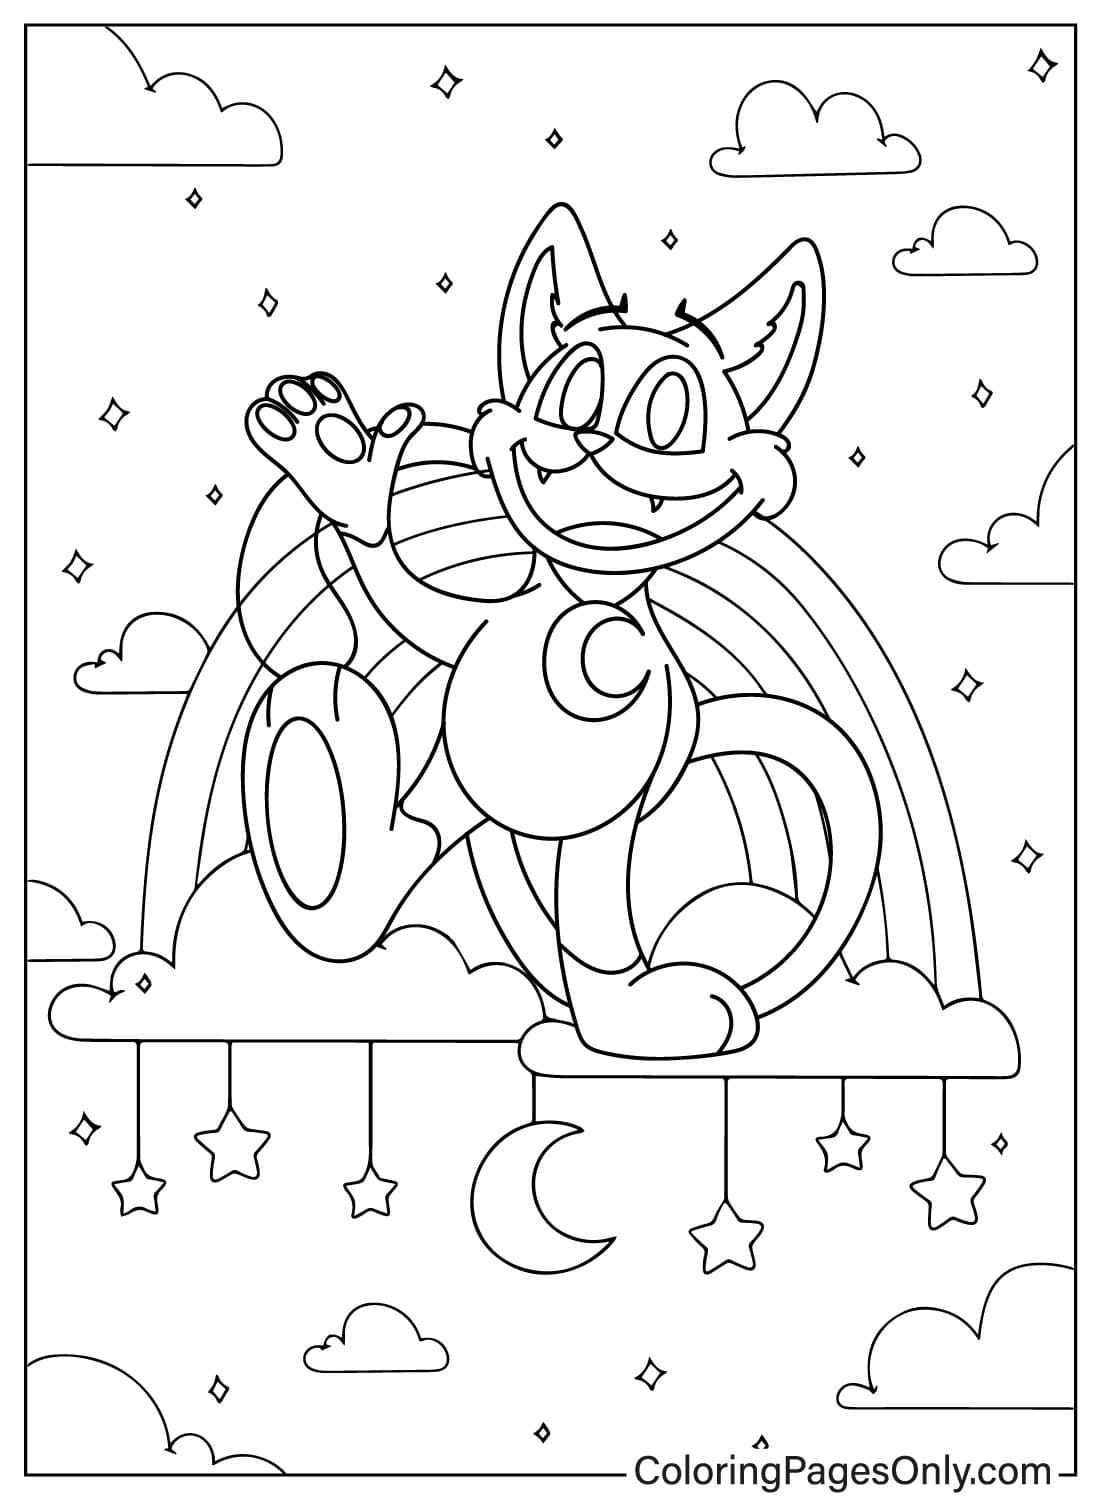 CatNap Coloring Page Free Printable from CatNap